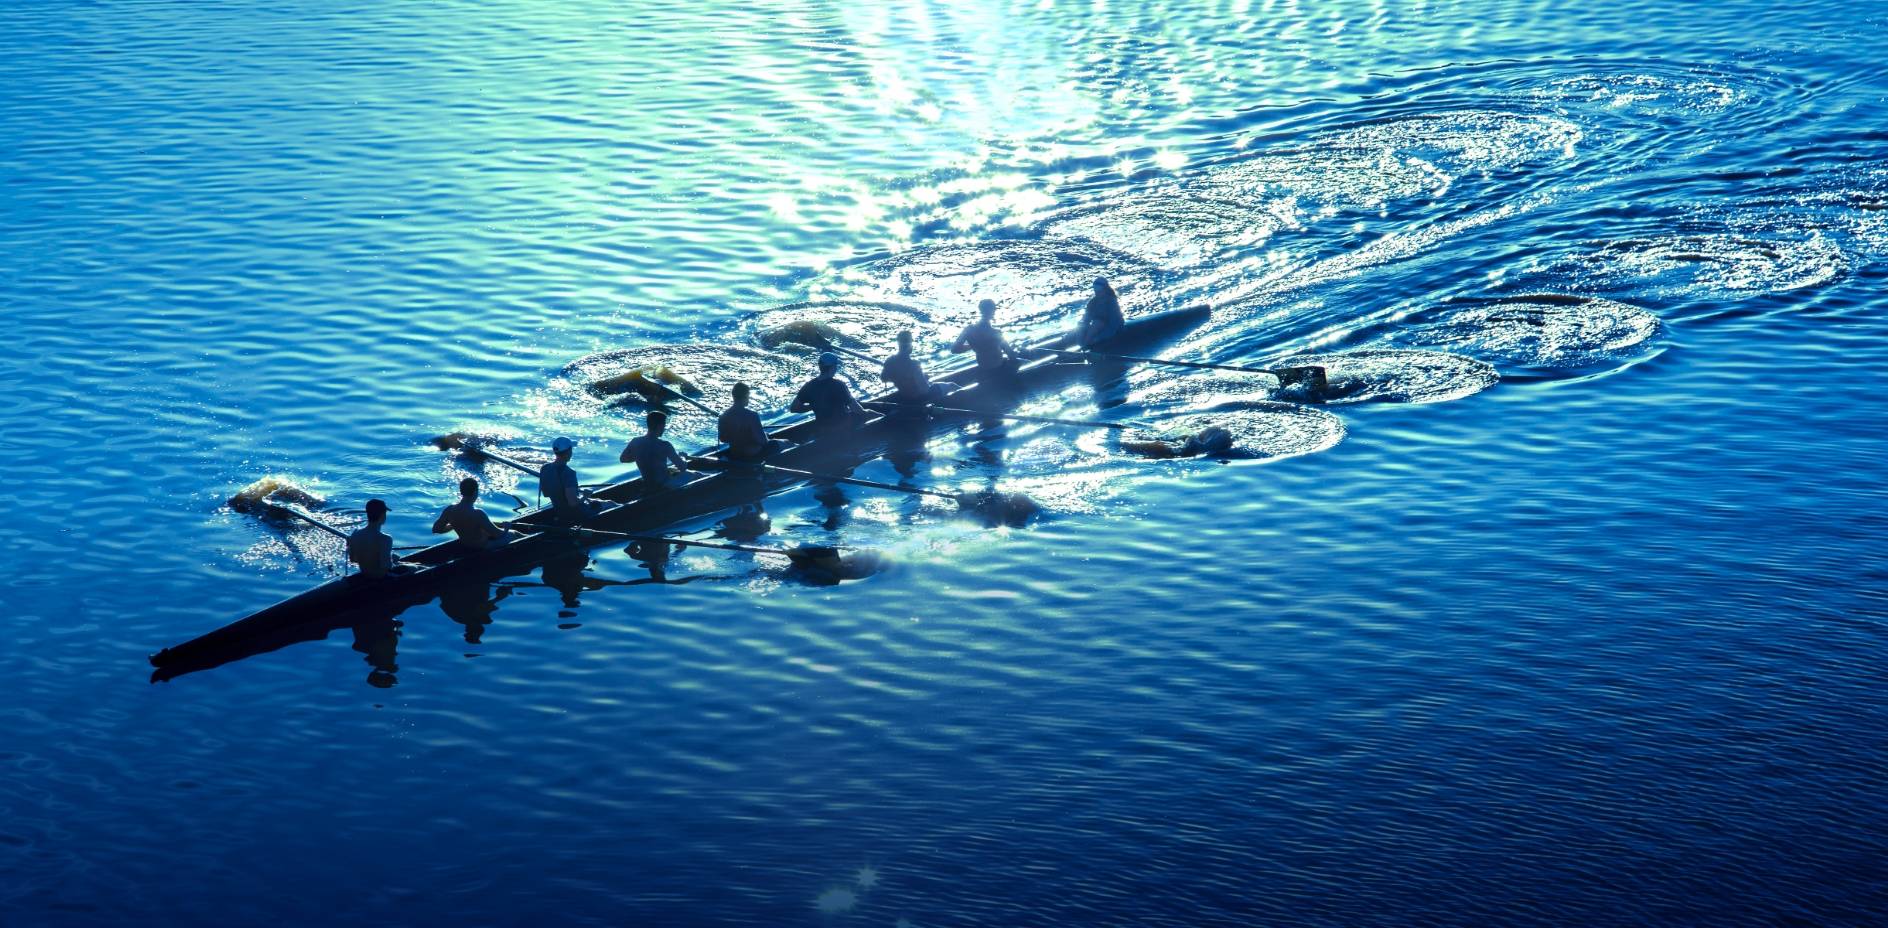 Row team in water with sun glare